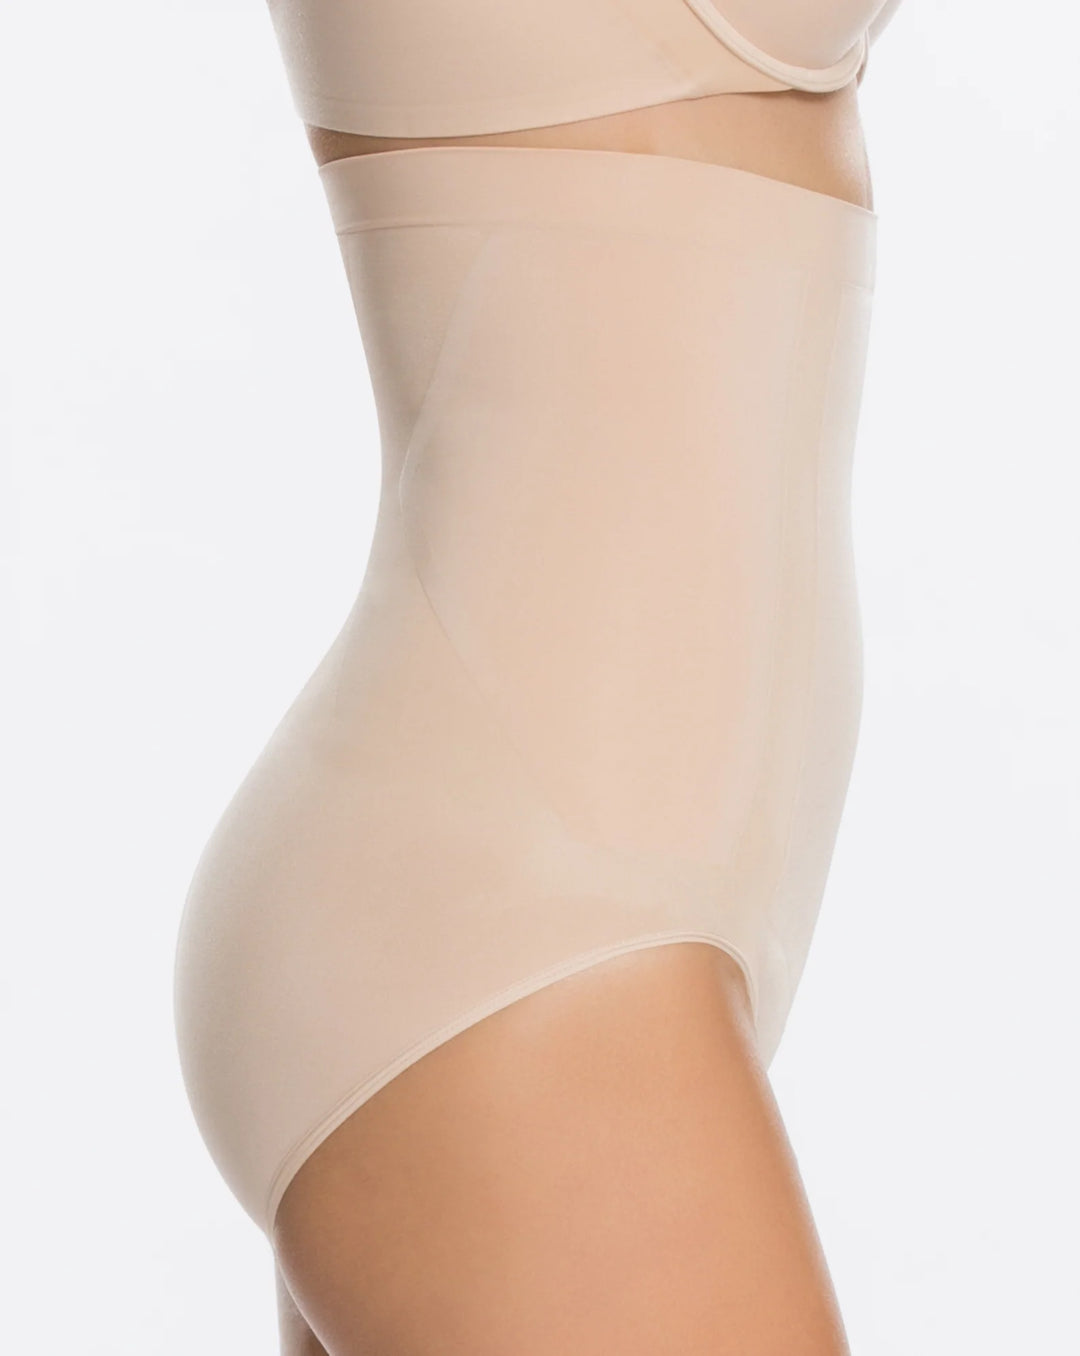 ONCORE HIGH WAISTED BRIEF- NUDE